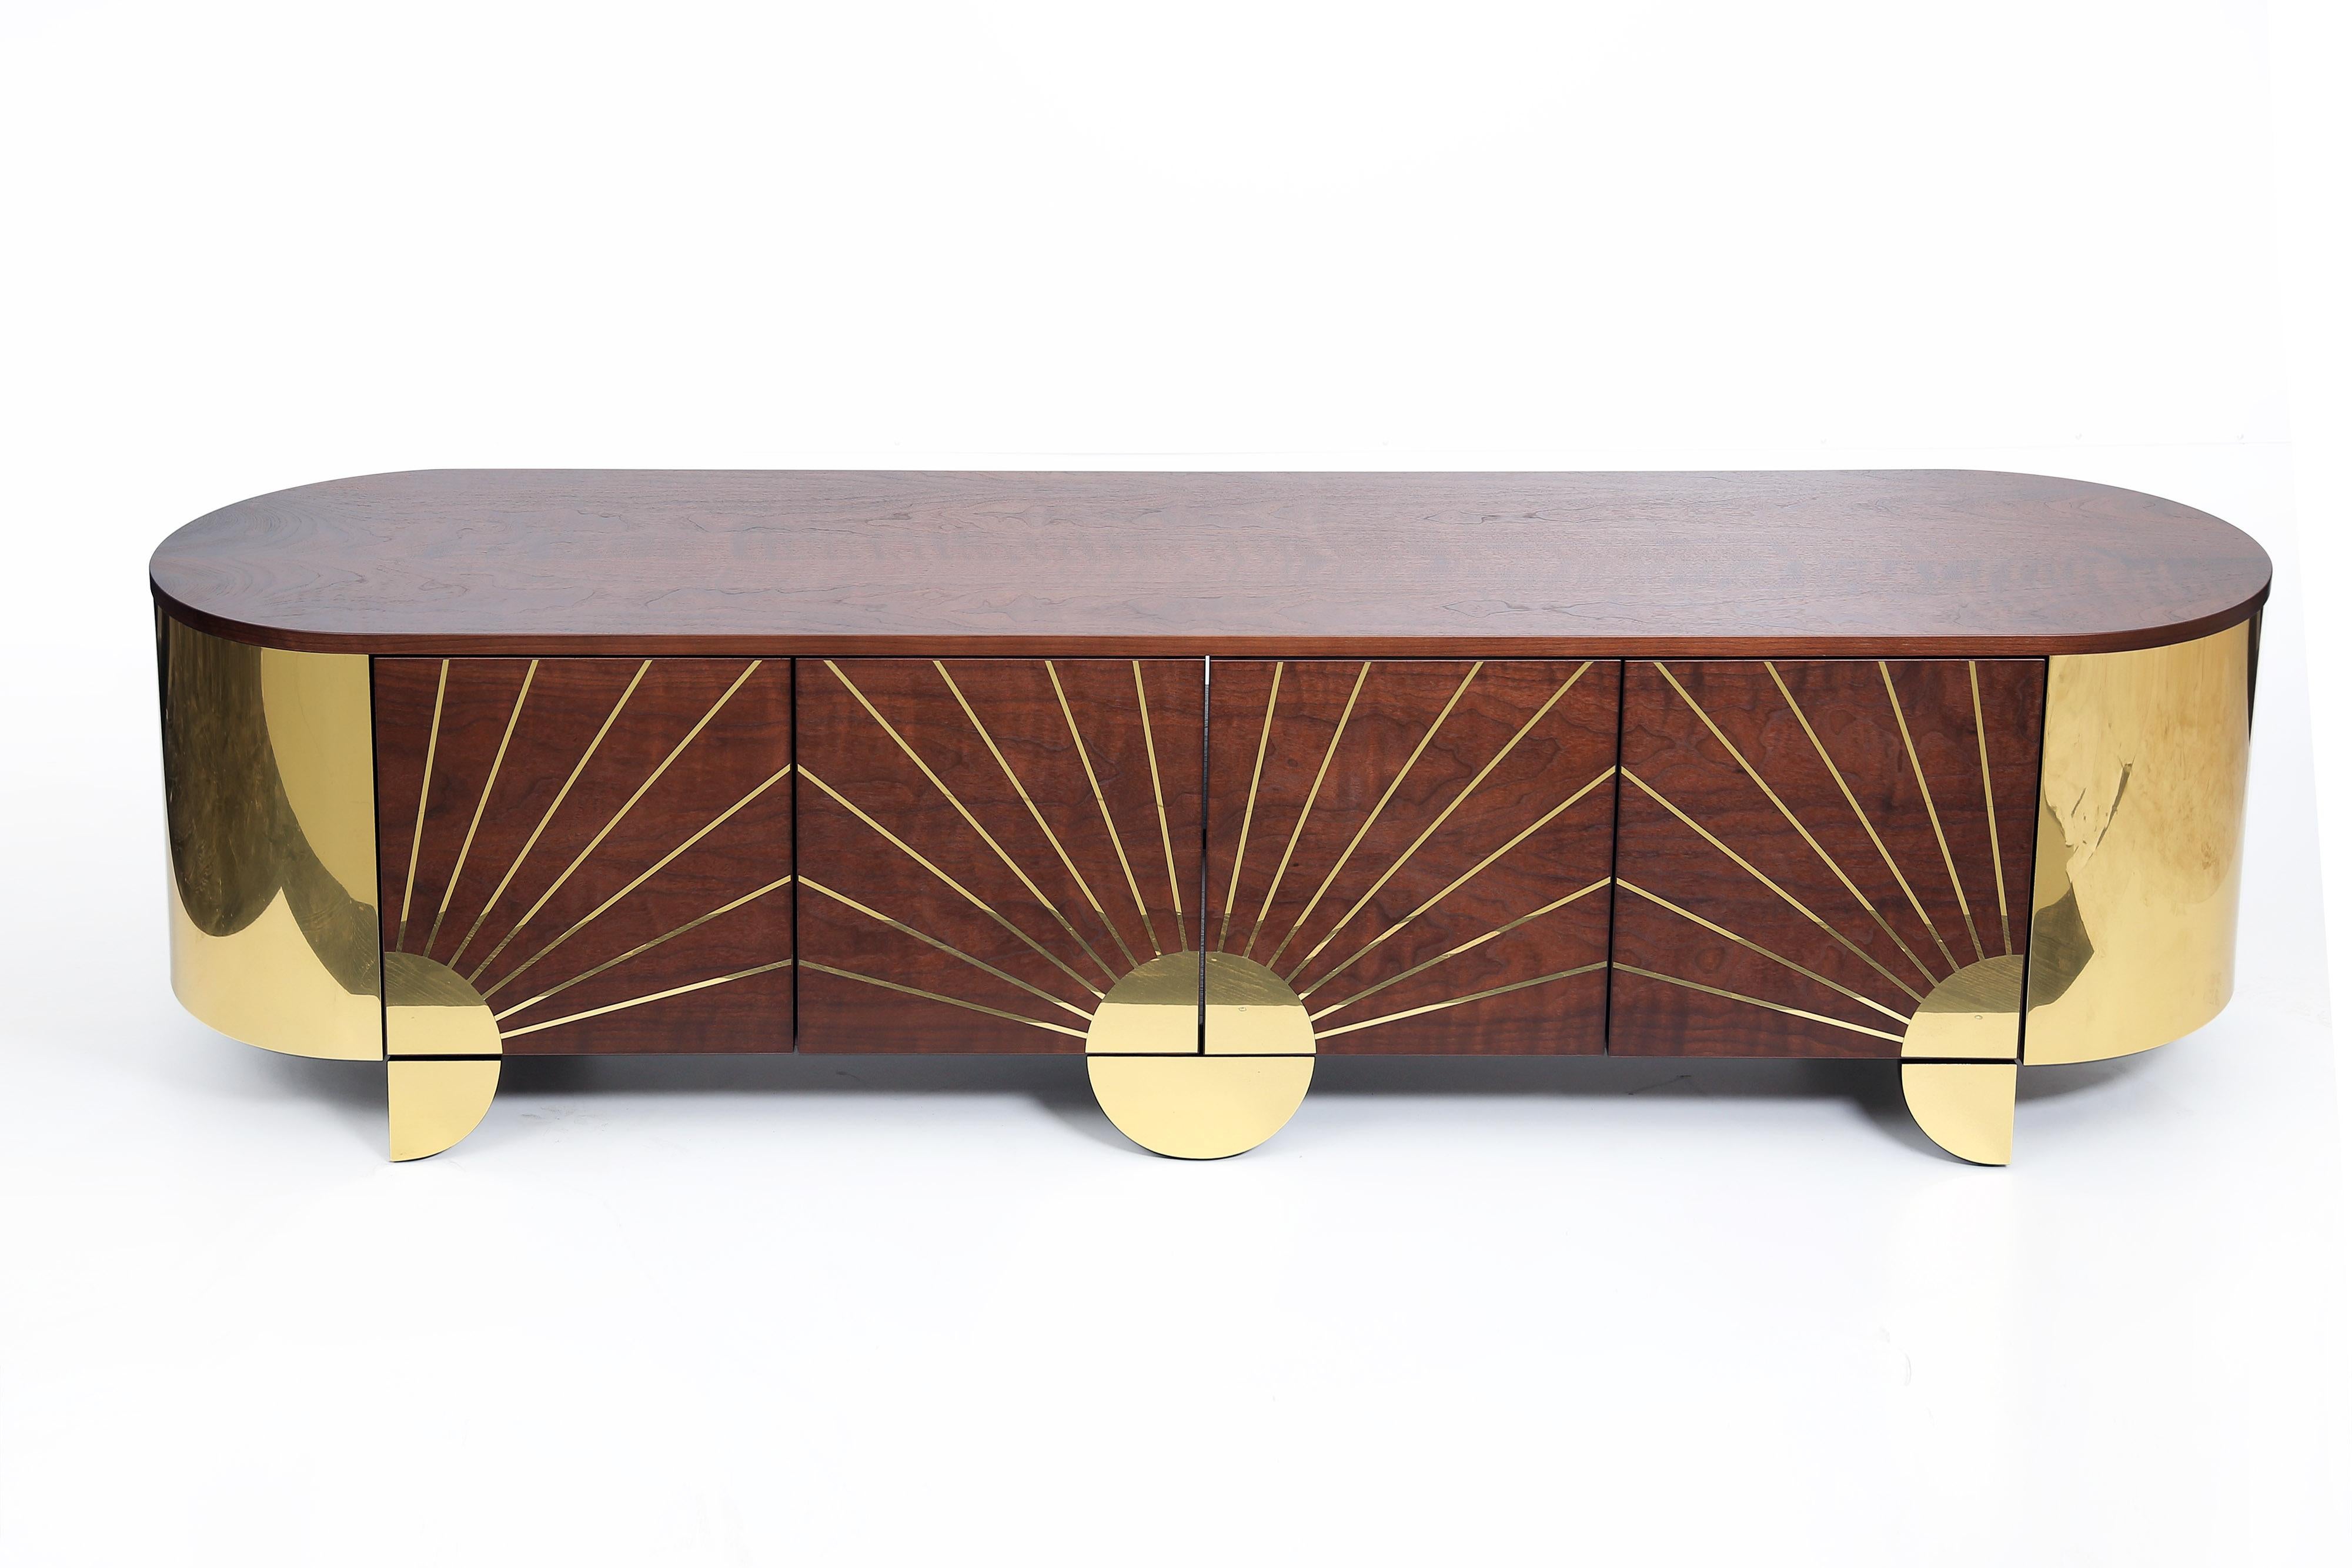 Media console Sinatra! A statement 4-door console together with a push-pull opening mechanism to complete the contemporary look and feel. A fabulous console from a collection inspired by the Art Deco style each item is truly precious, where metal